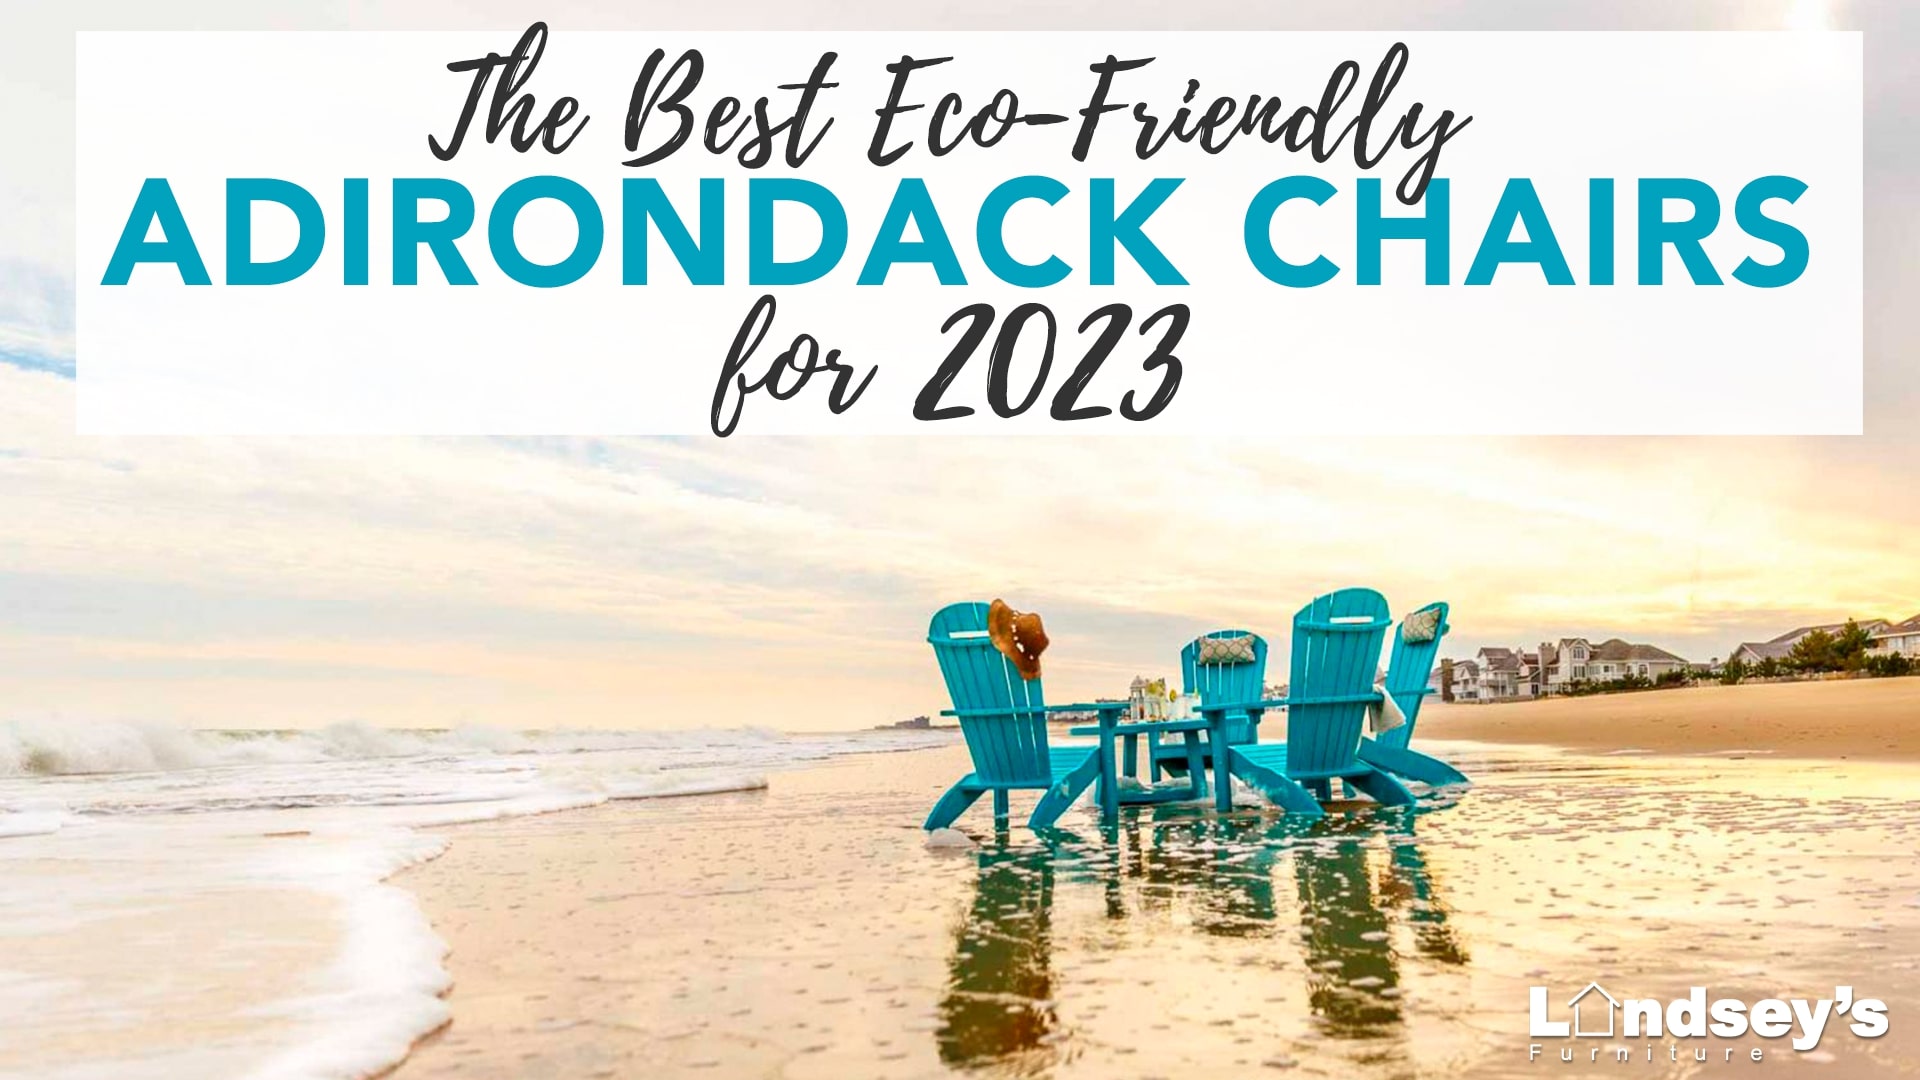 The Best Eco-Friendly Adirondack Chairs of 2023